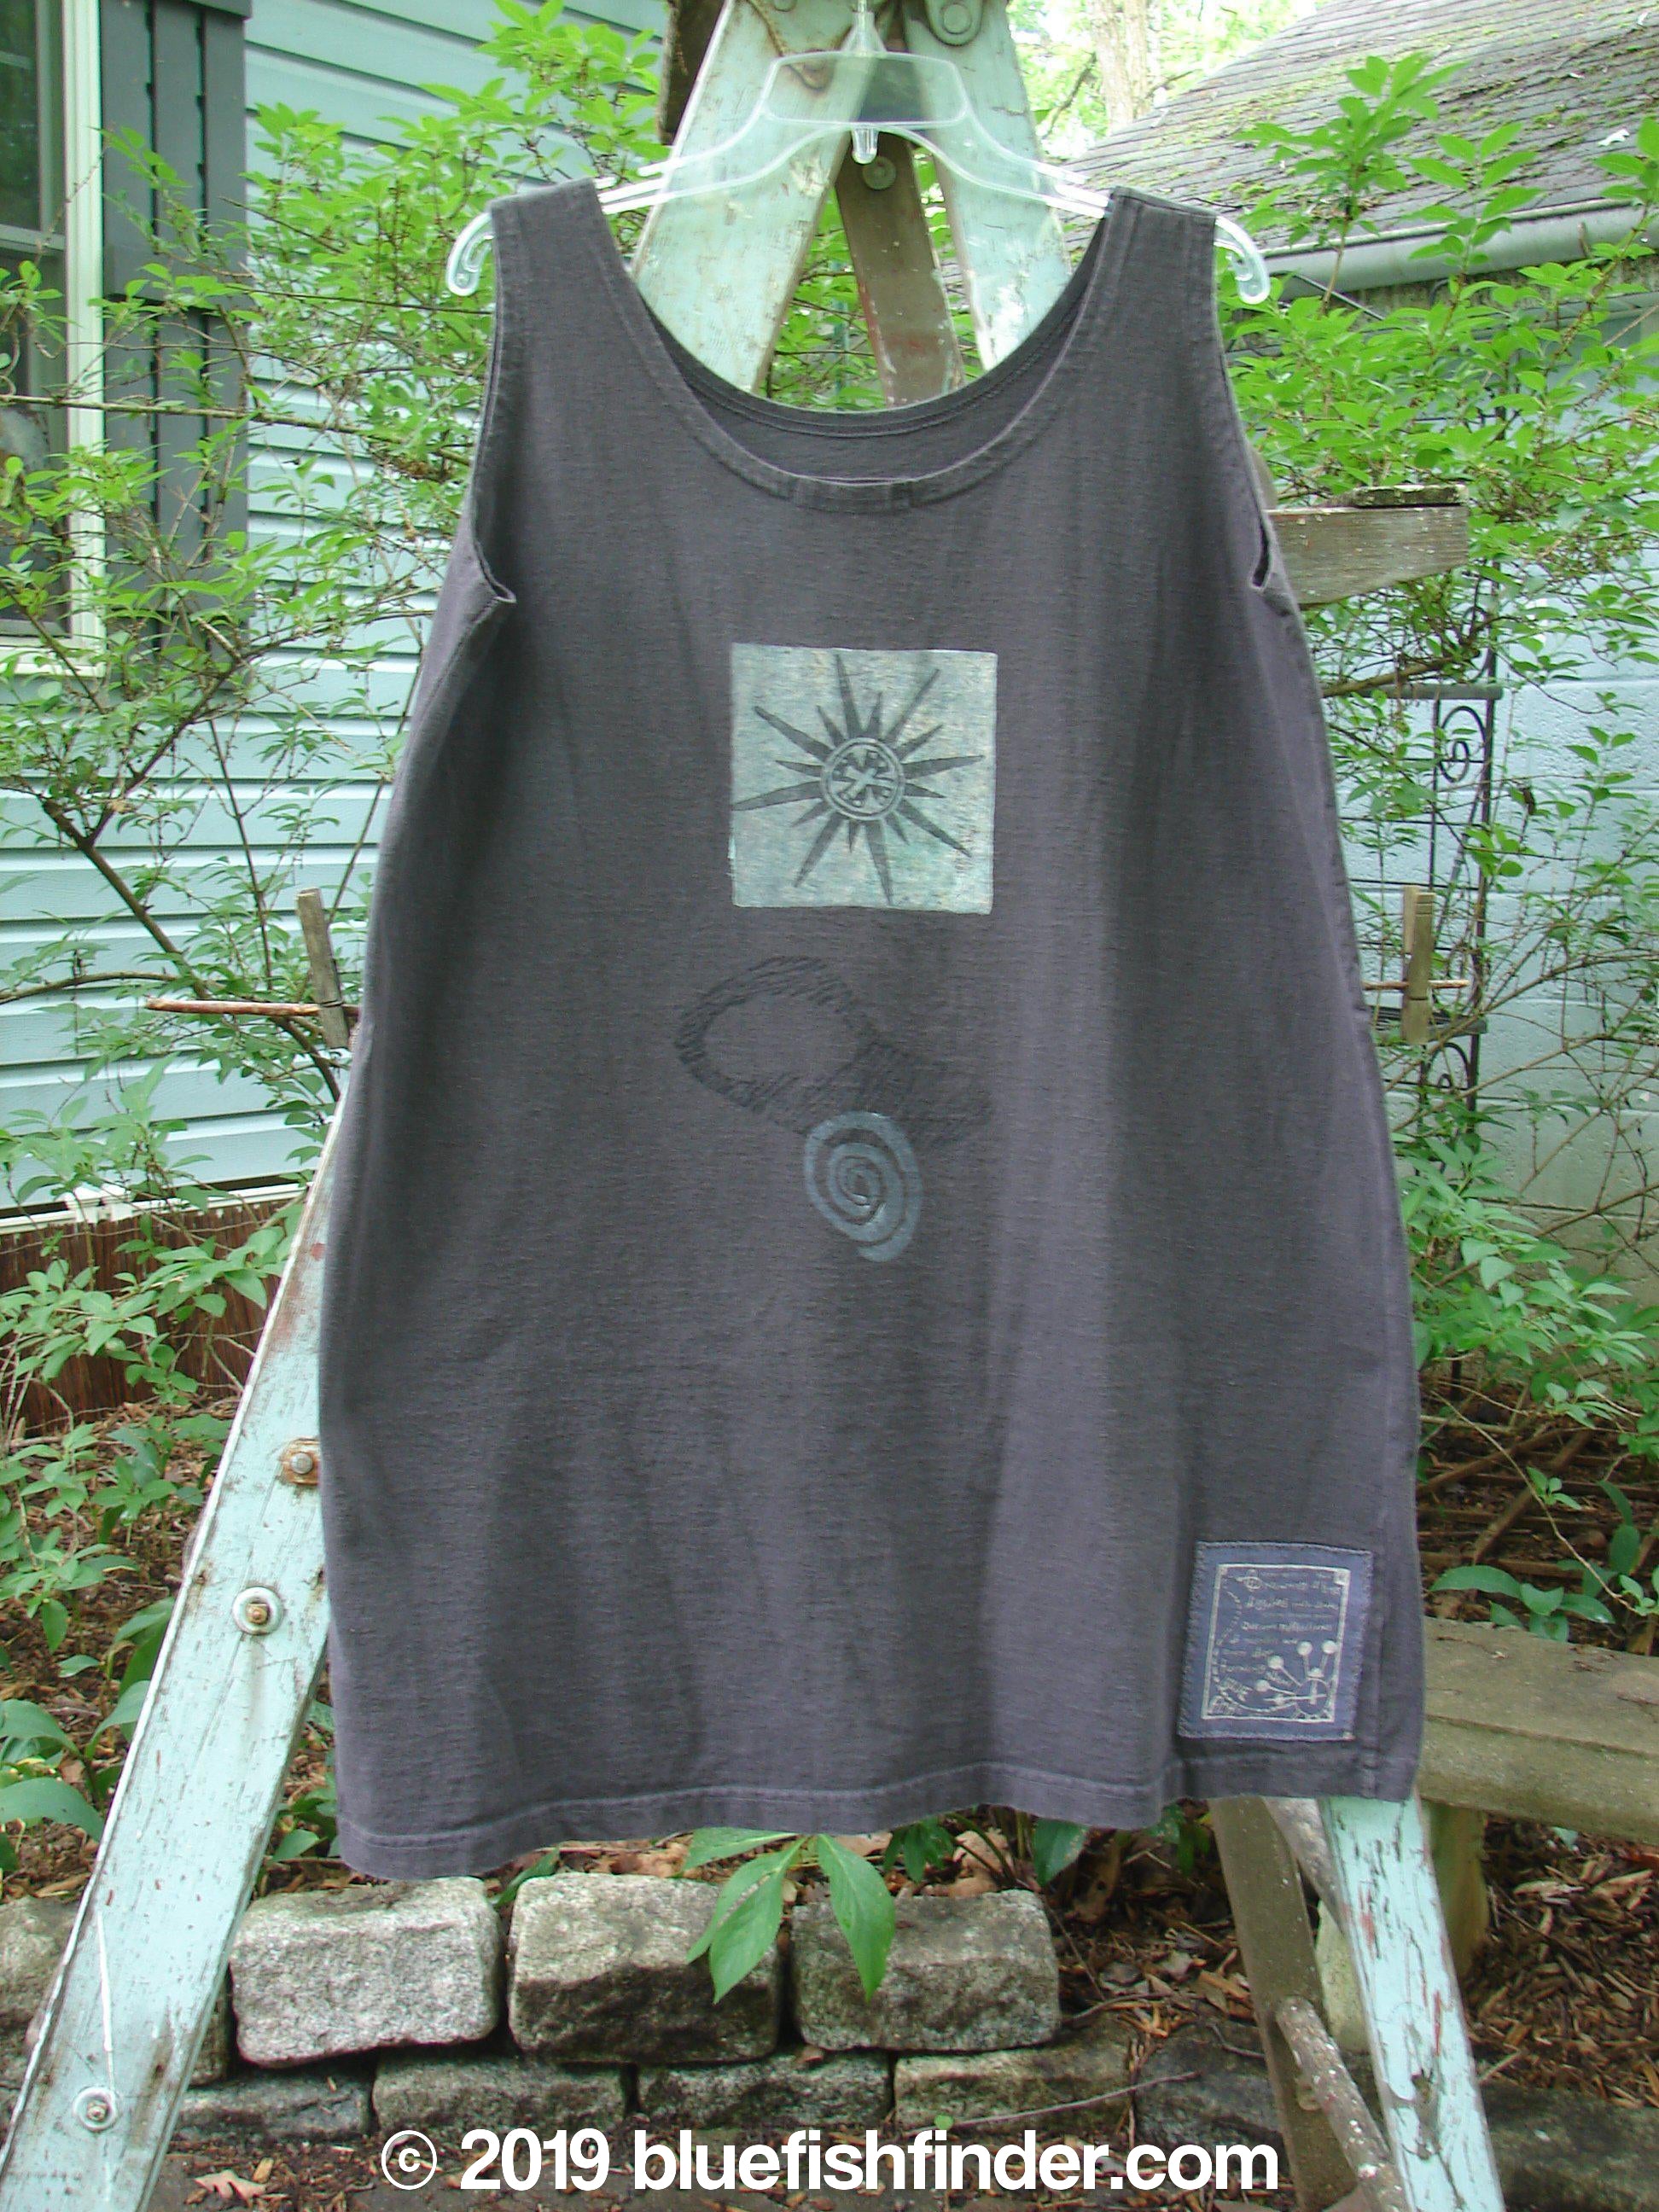 Image alt text: "1995 Sun Glint Tank with Blue Fish Patch on a wooden ladder, perfect condition, organic cotton"